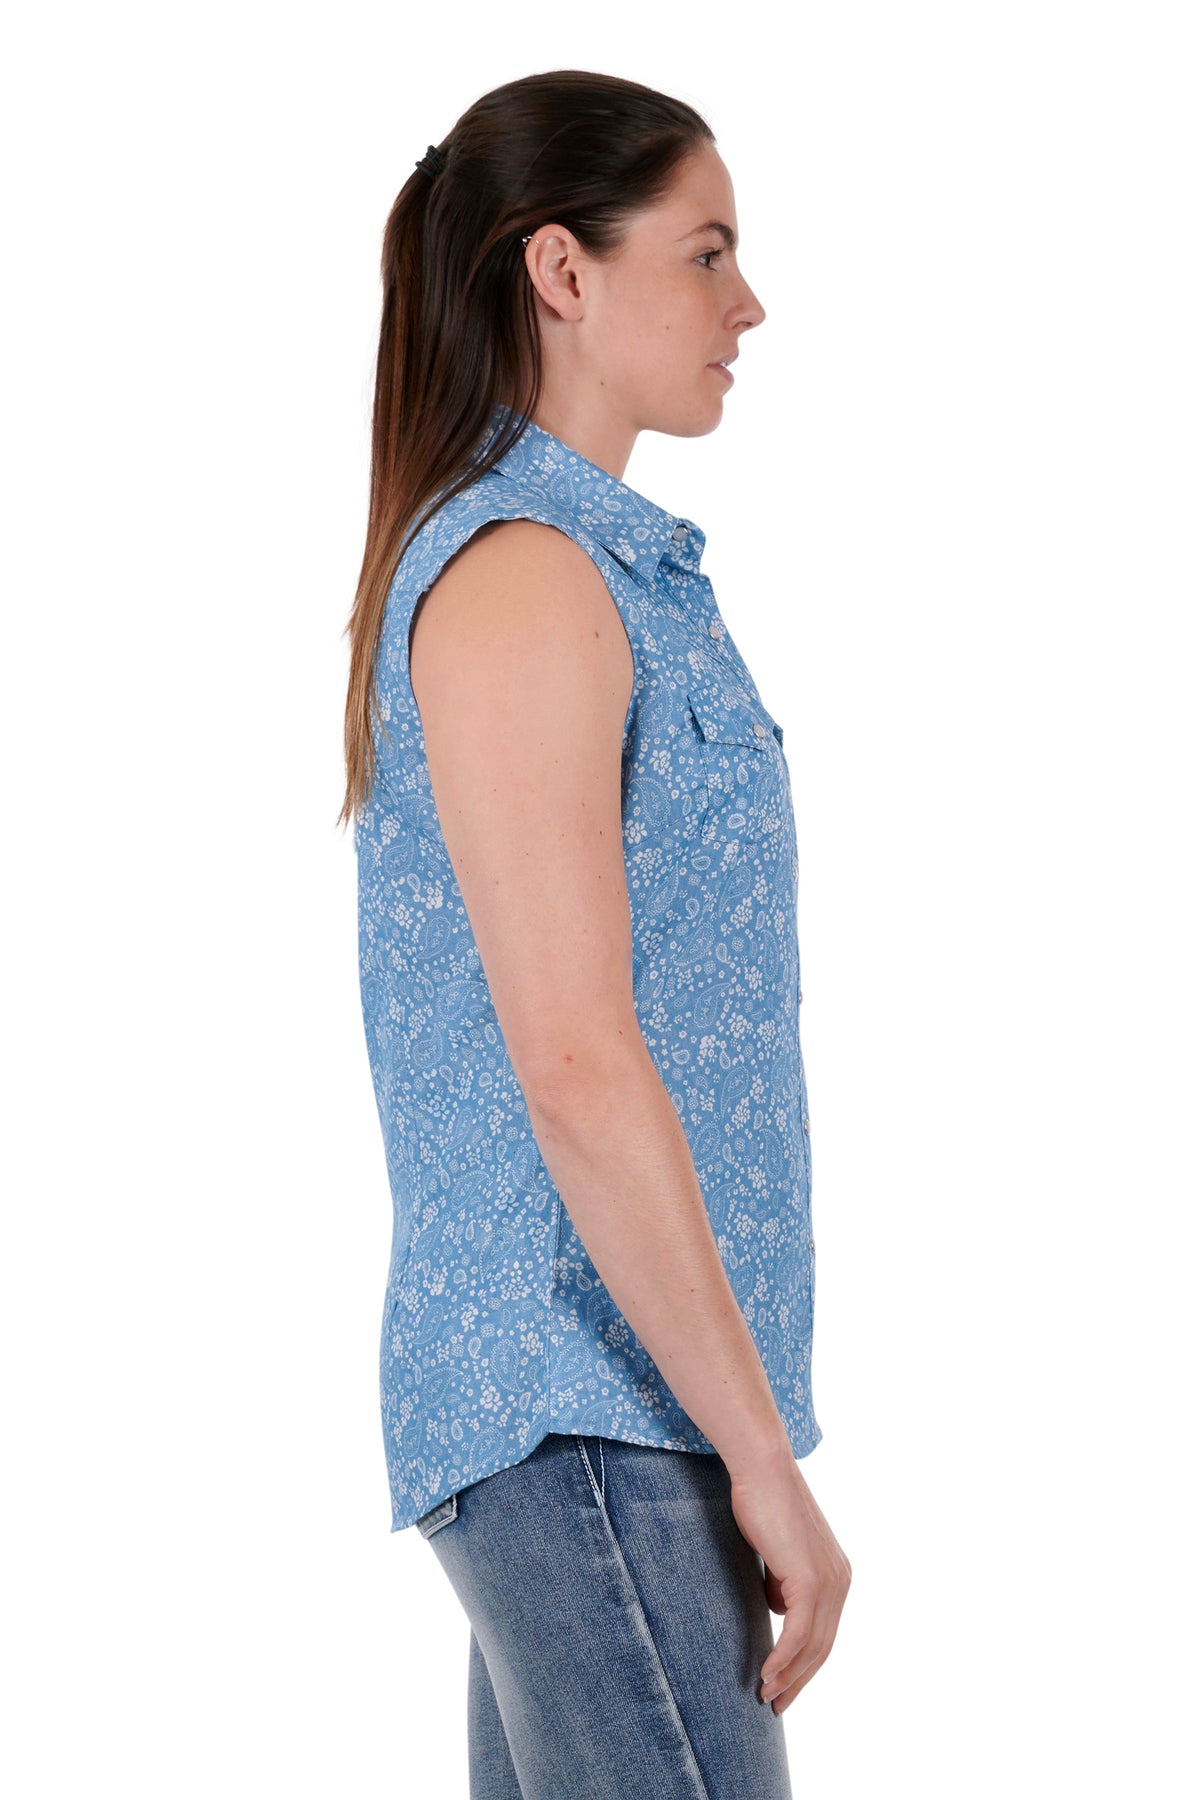 Pure Western Womens Giselle Short Sleeve Shirt - Chambray